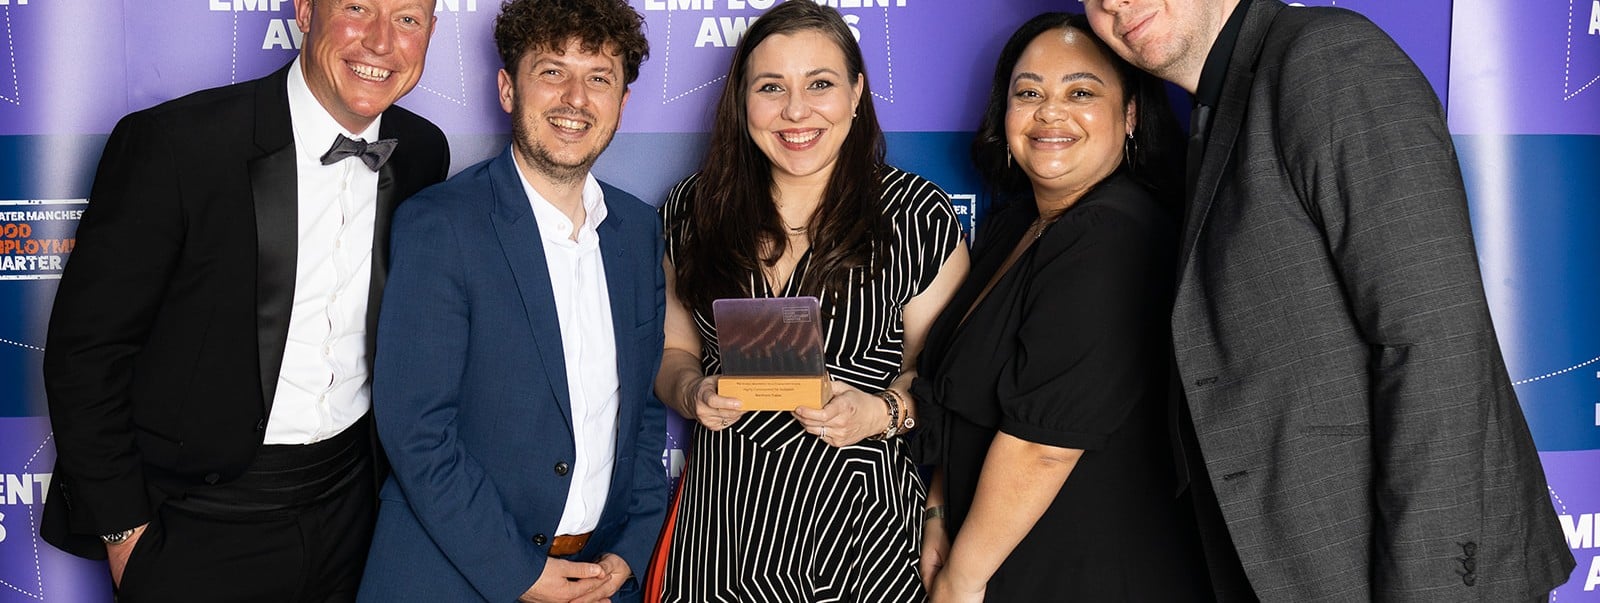 this-image-shows-the-northern-team-holding-their-award